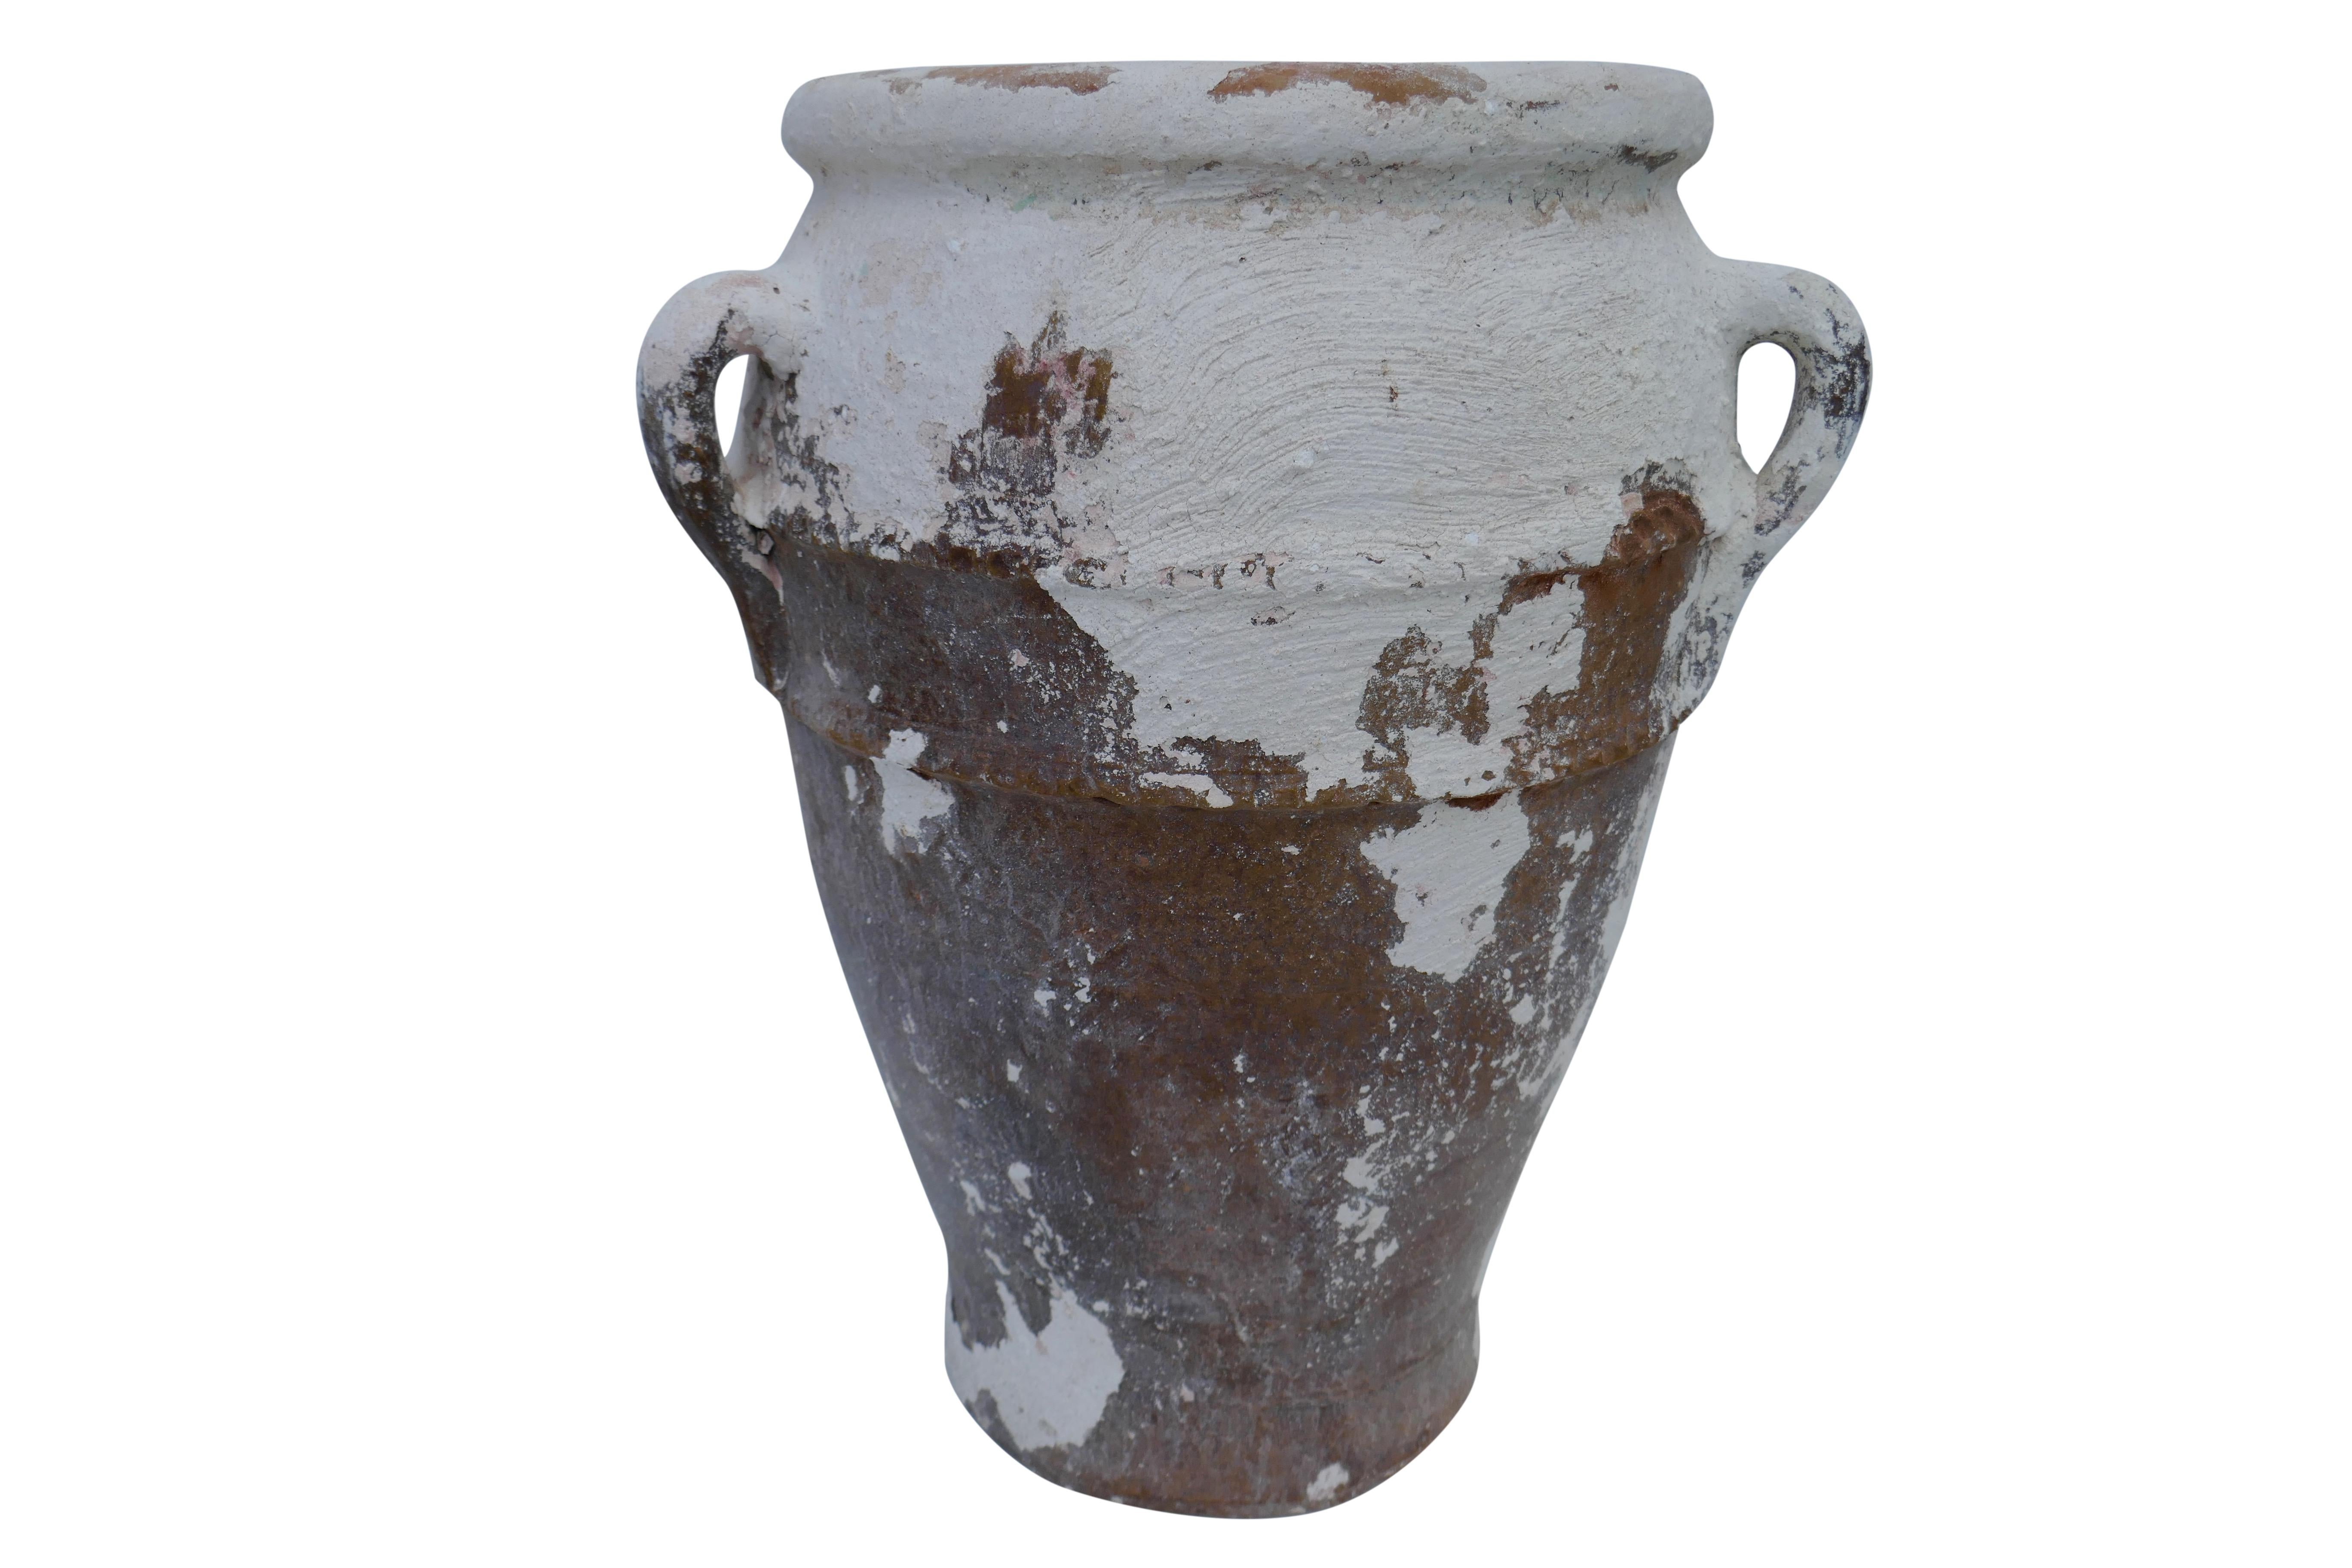 A wonderful original vintage hand-crafted Moroccan terracotta water vessel. This beautiful find displays the natural age, wear and patina that only time can create. Natural occurring distress and chipping of the white water cooling shell layer, 3